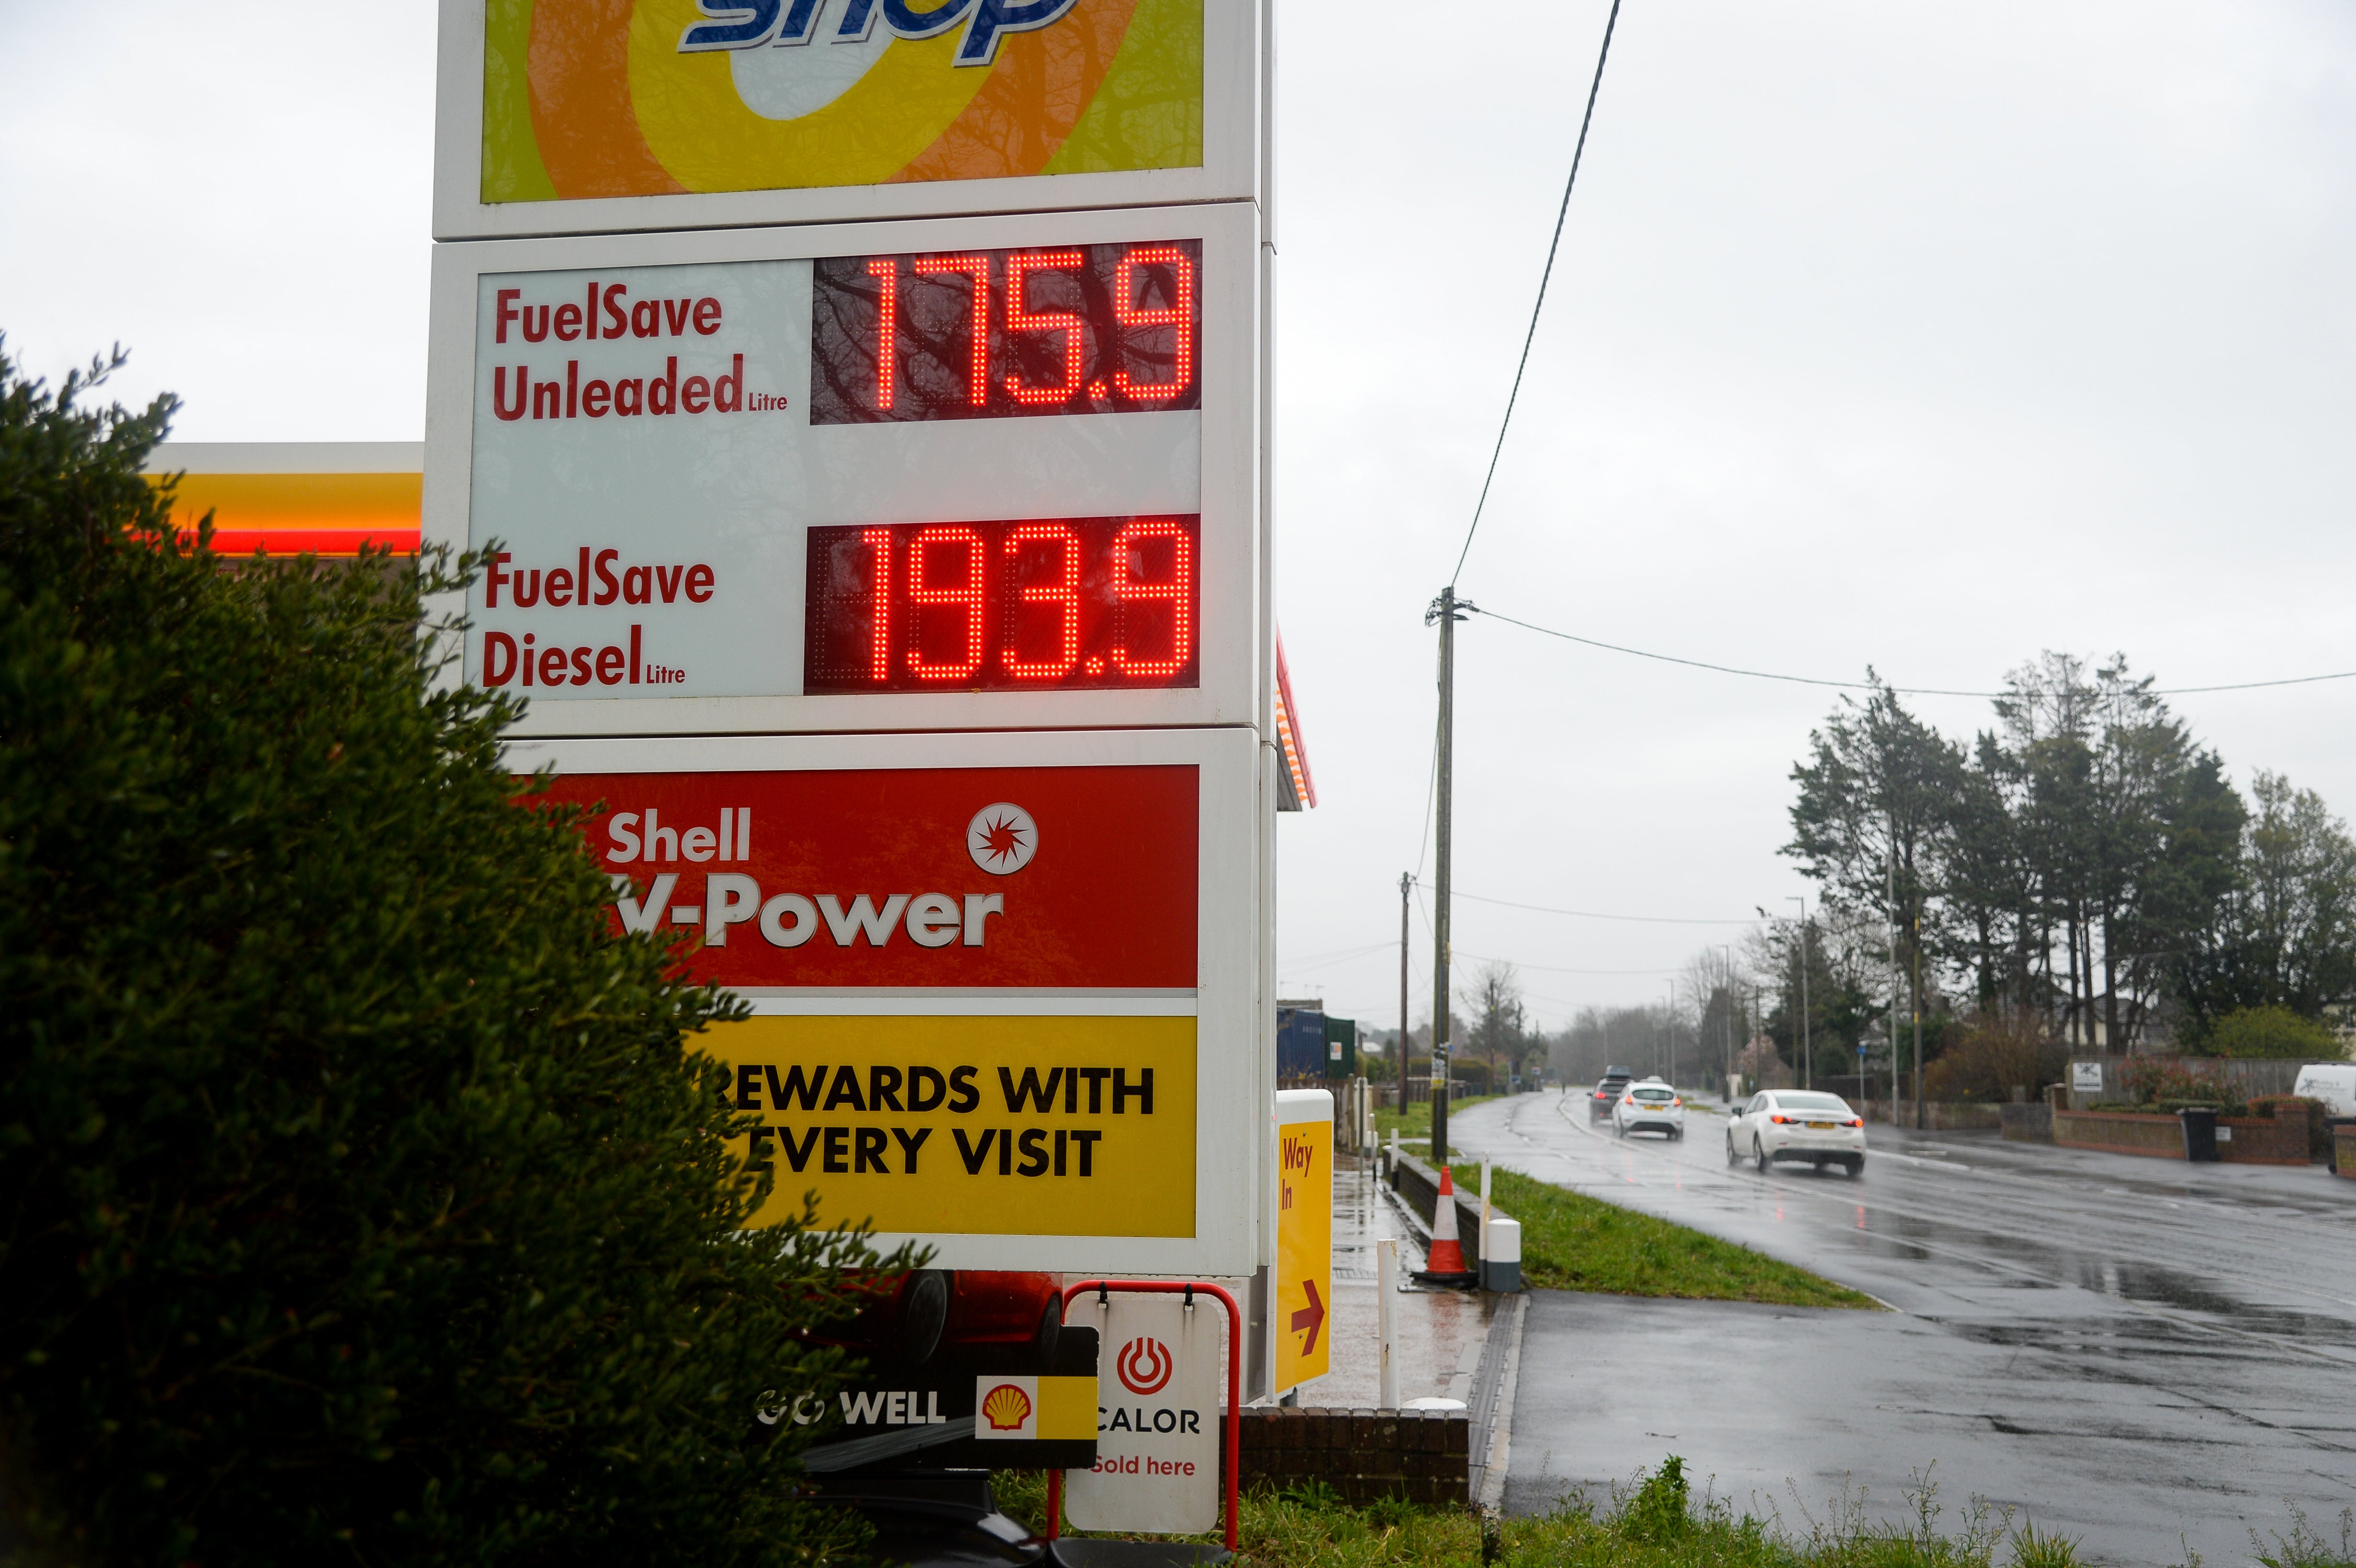 Fuel prices at a petrol station in Wimborne, England on Friday